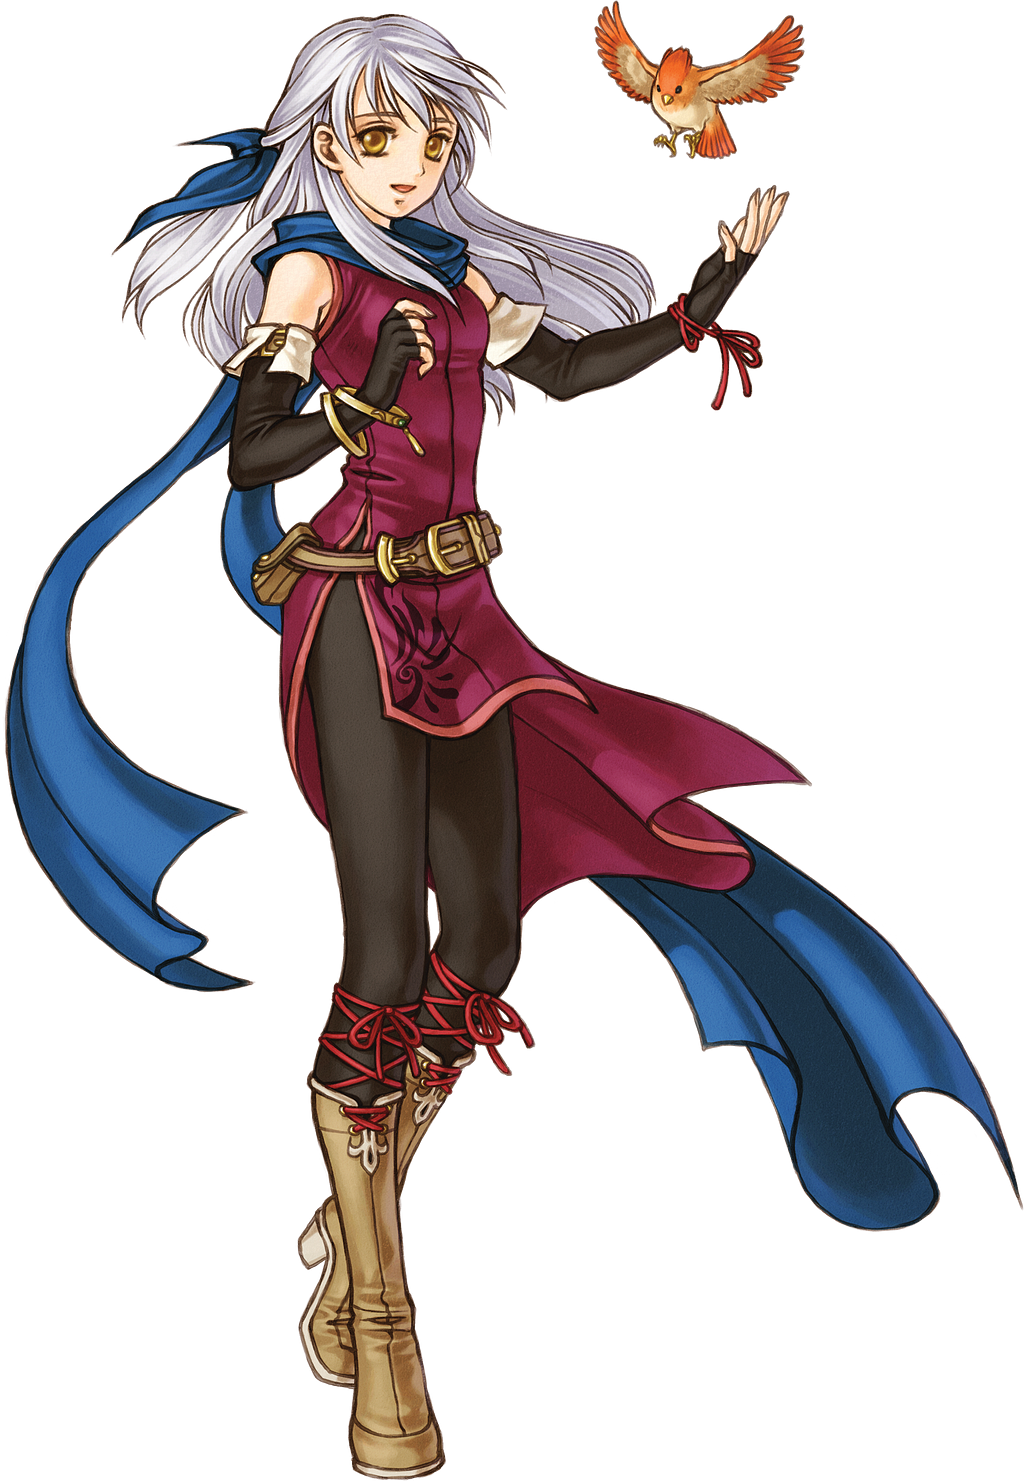 Micaiah from Fire Emblem: Radiant Dawn